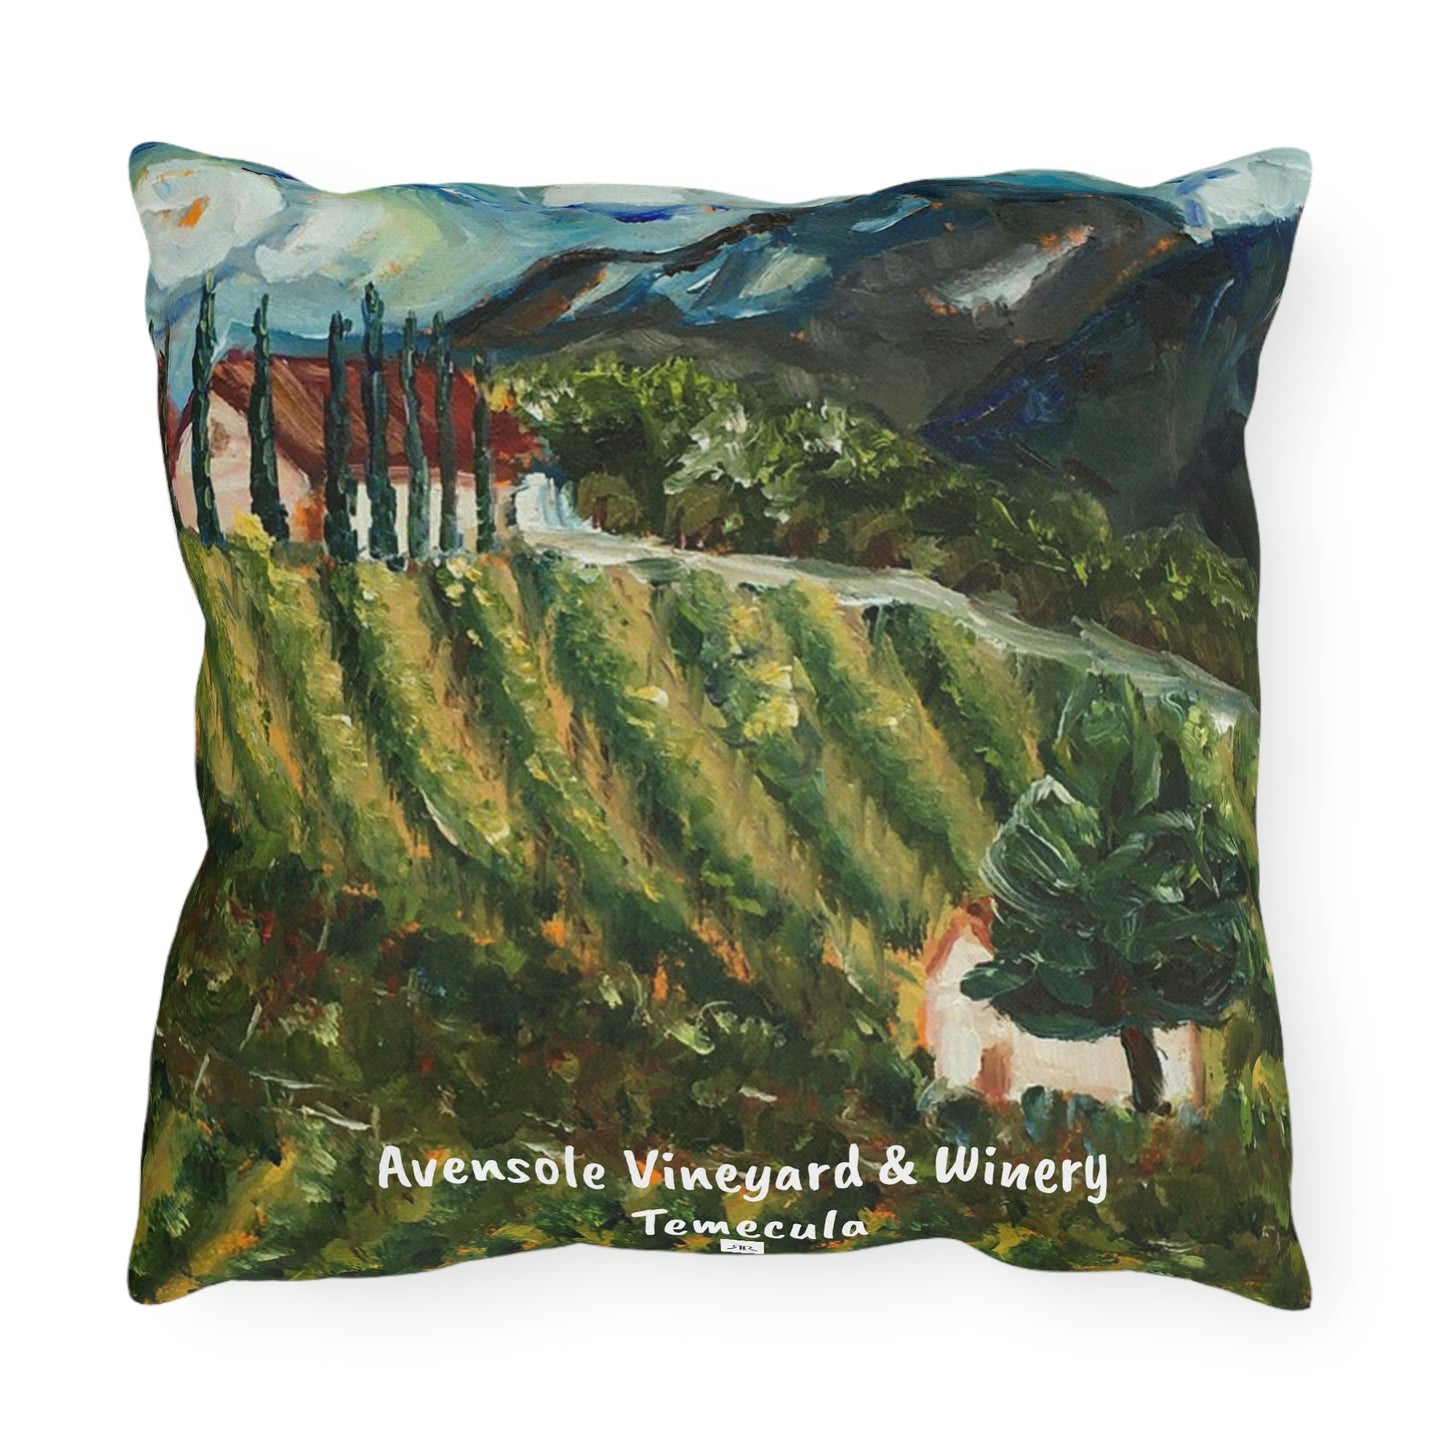 Temecula Outdoor Pillows featuring Avensole Vineyard and Winery